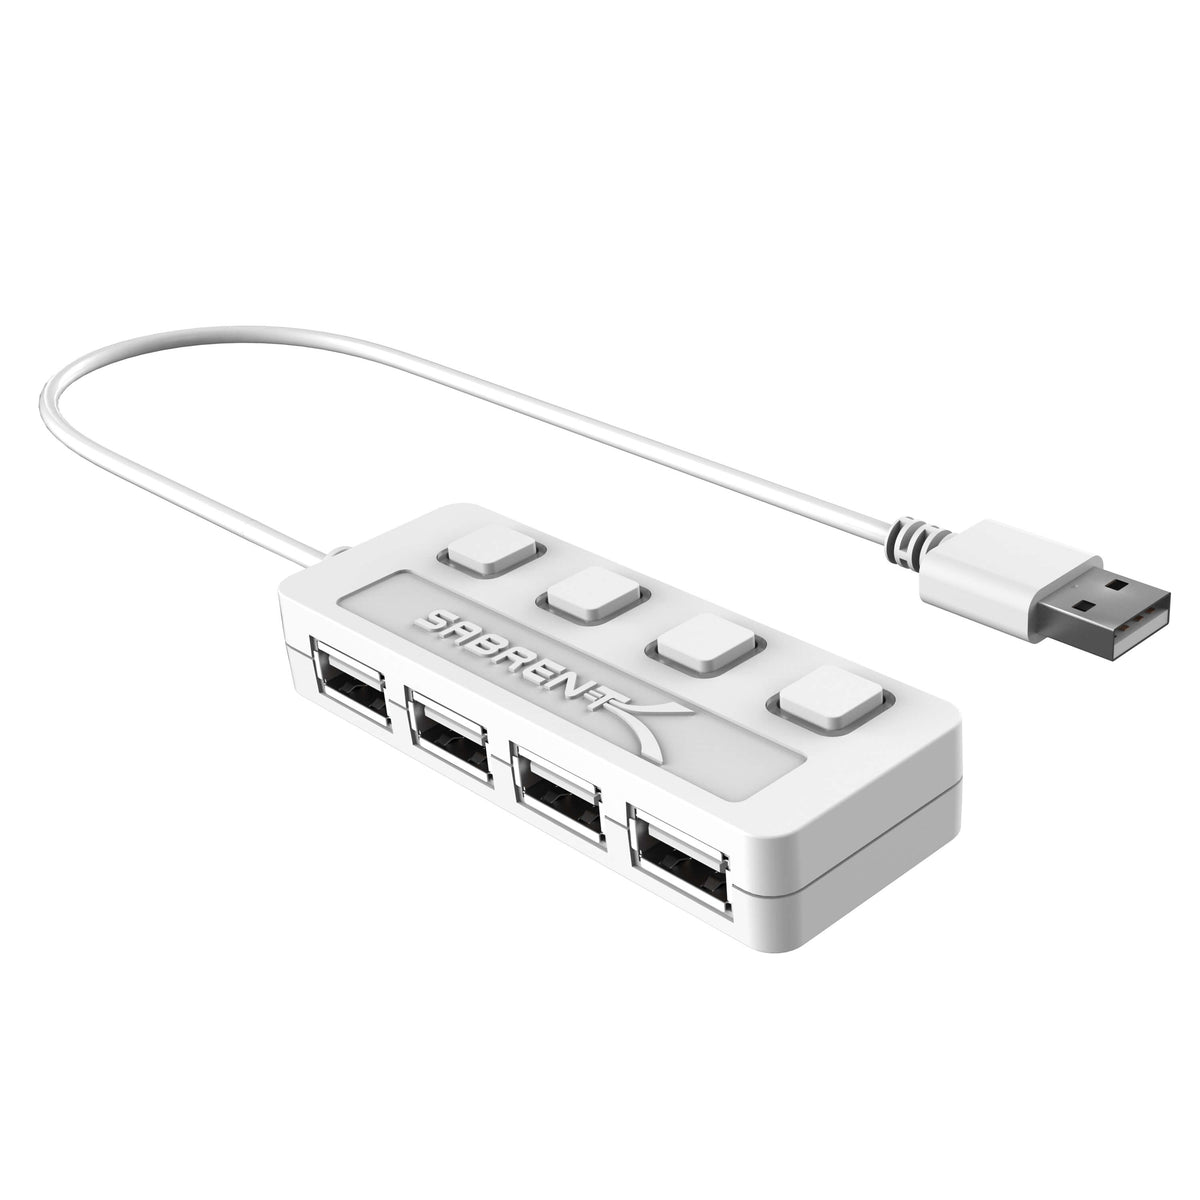 4-Port USB 2.0 Hub With Power Switches | White